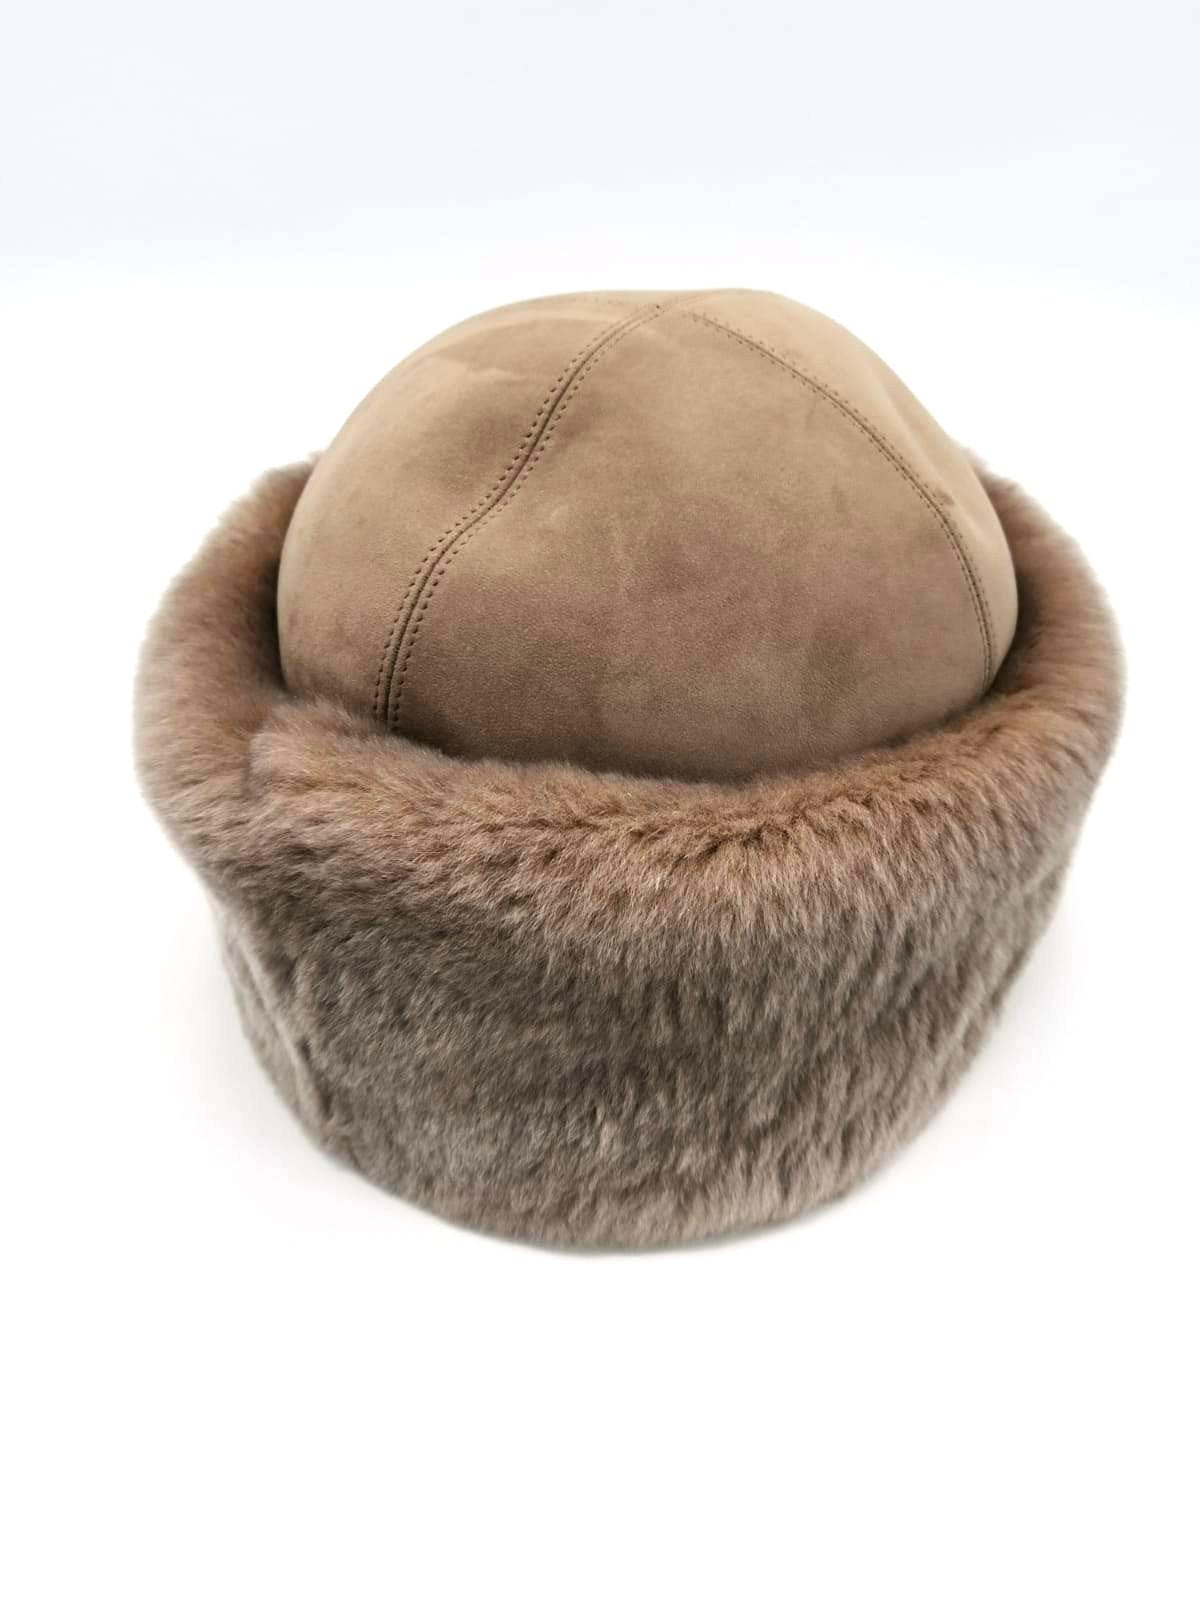 HERMES suede and fur hat size 56/M